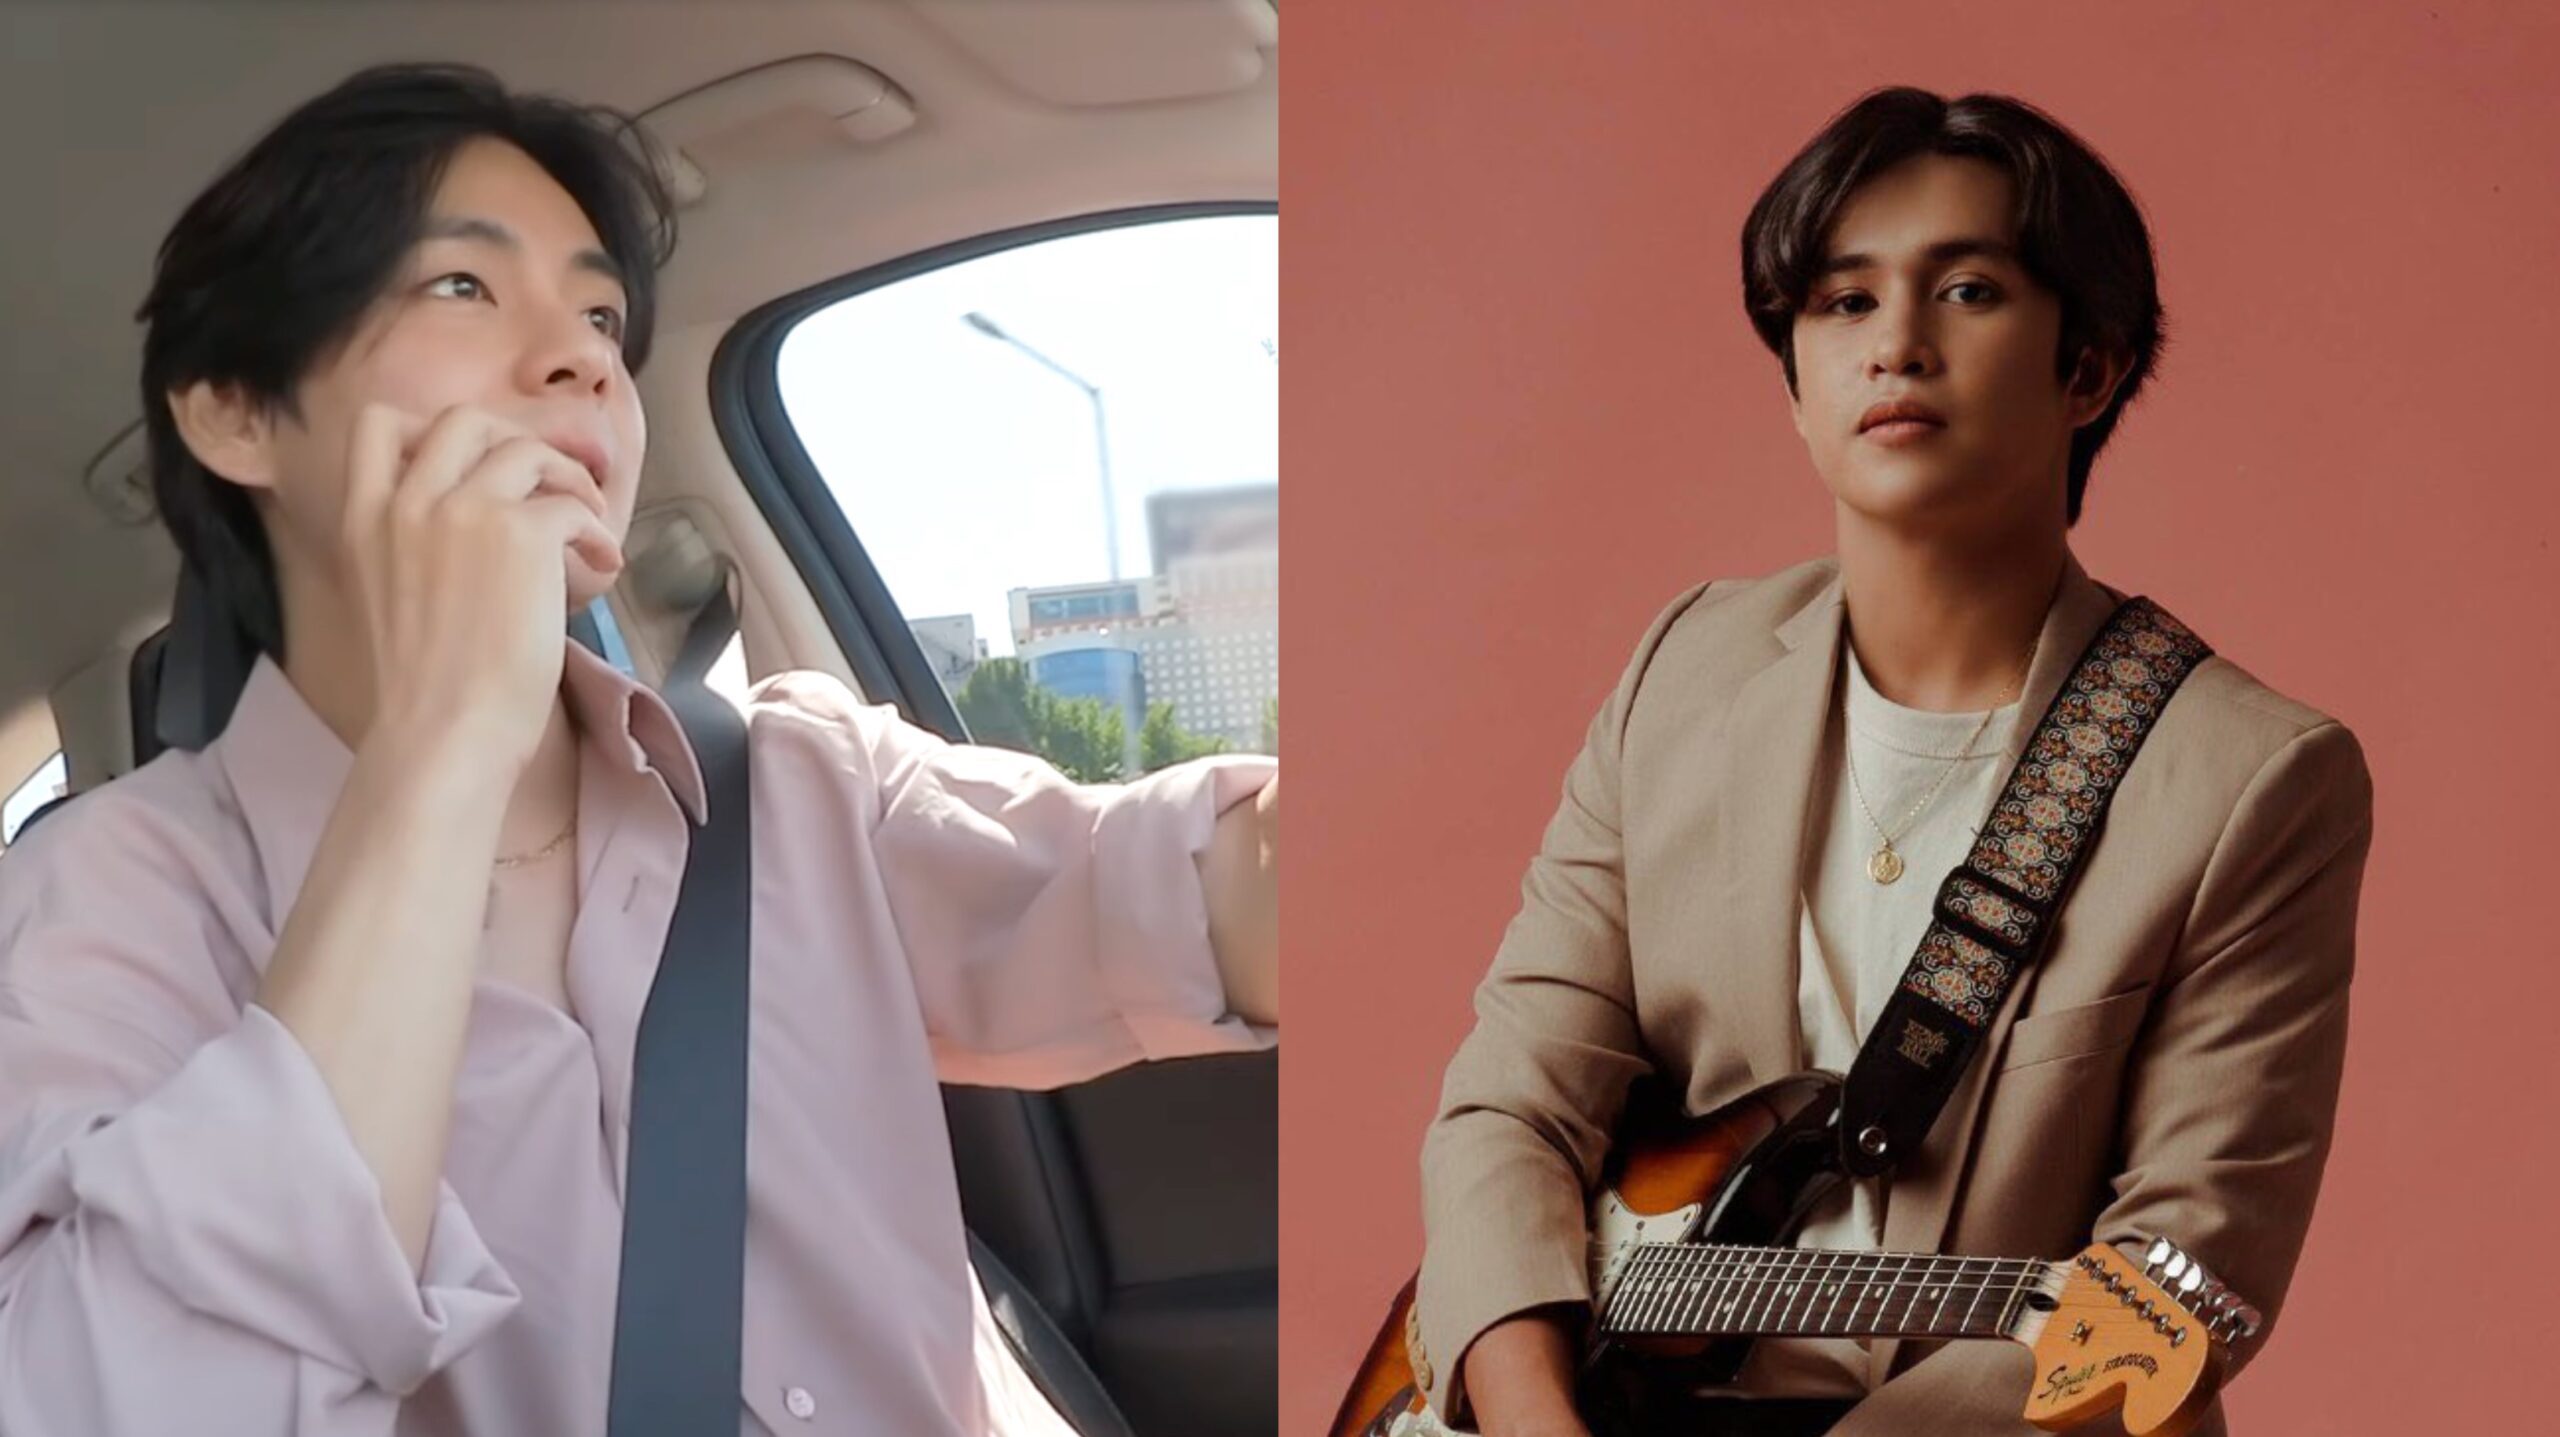 Paolo Sandejas reacts to BTS’ V jamming to his song ‘Sorry’